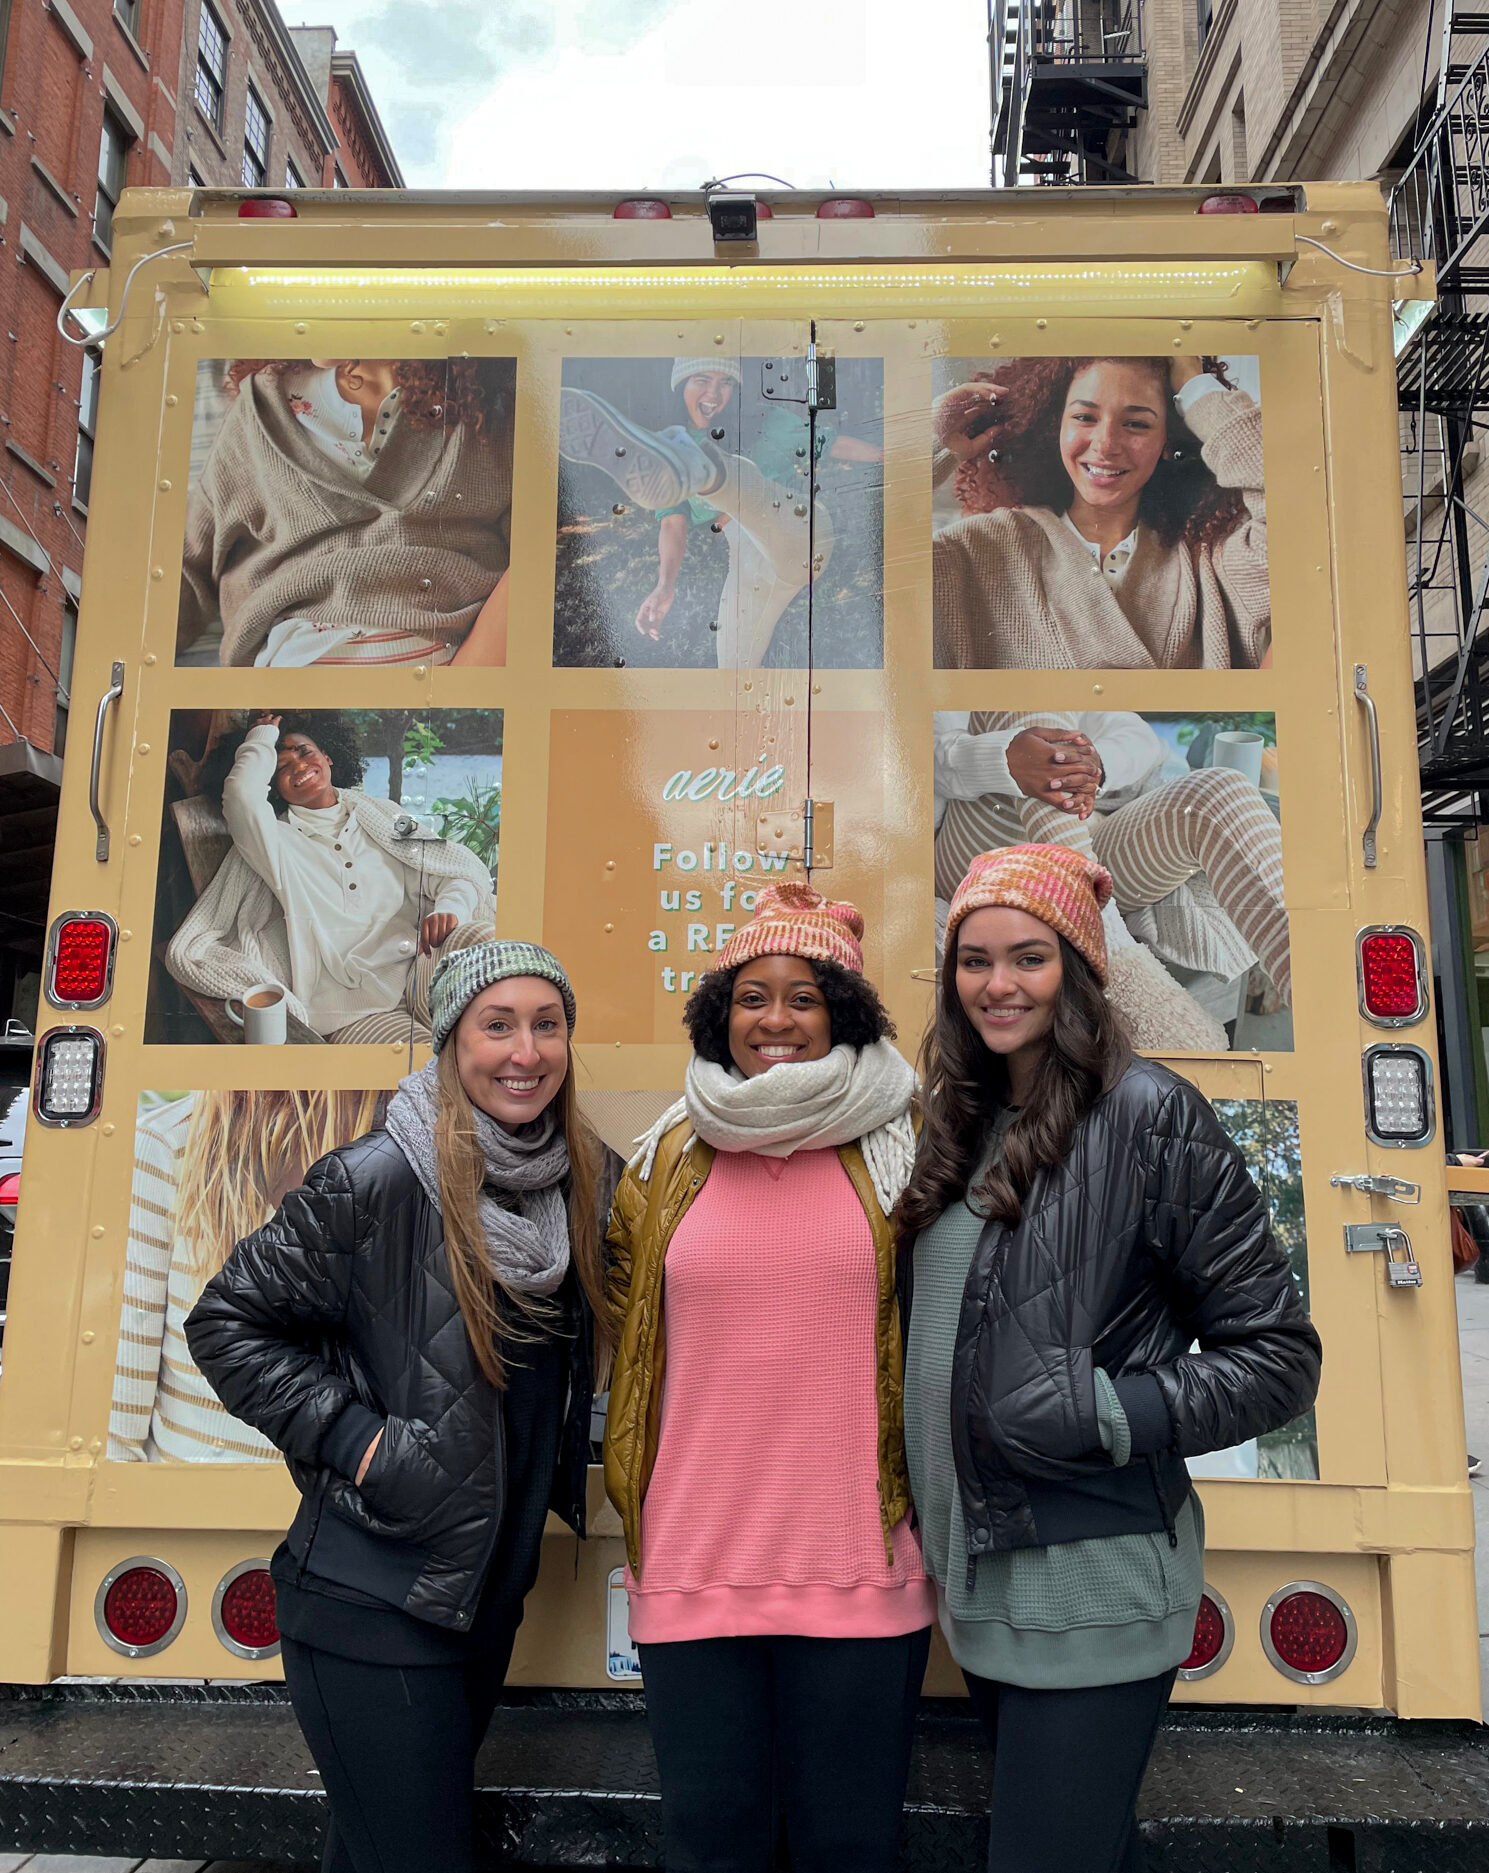 Aerie Waffle Truck Mobile Tour